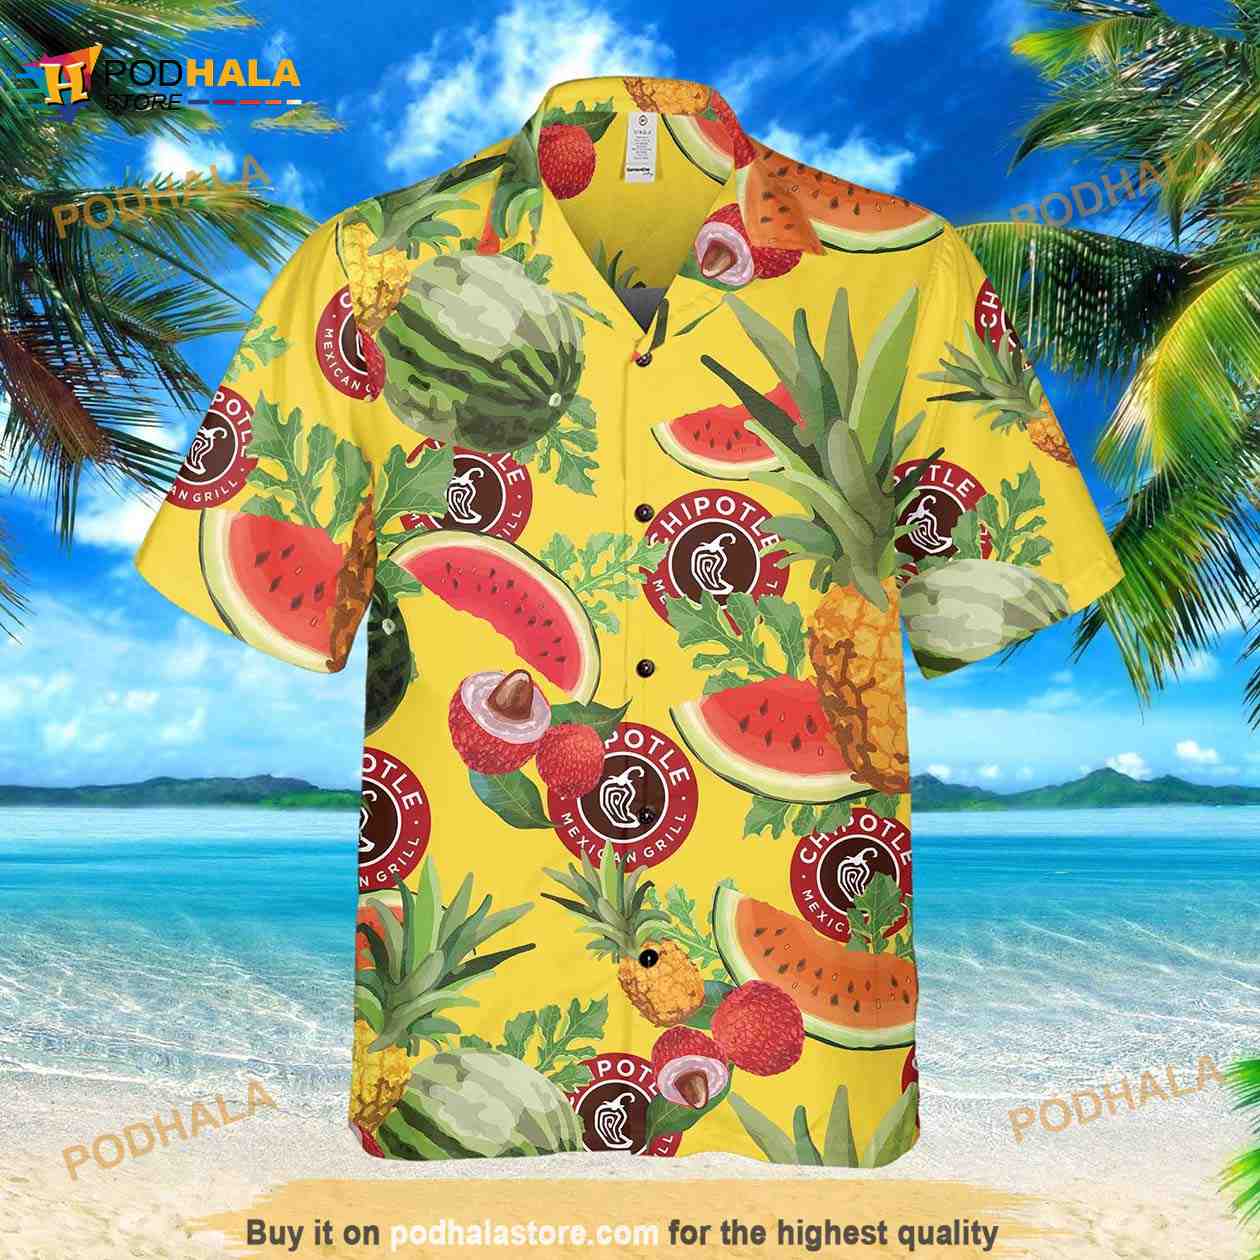 Chipotle Funny Hawaiian Shirt - Bring Your Ideas, Thoughts And